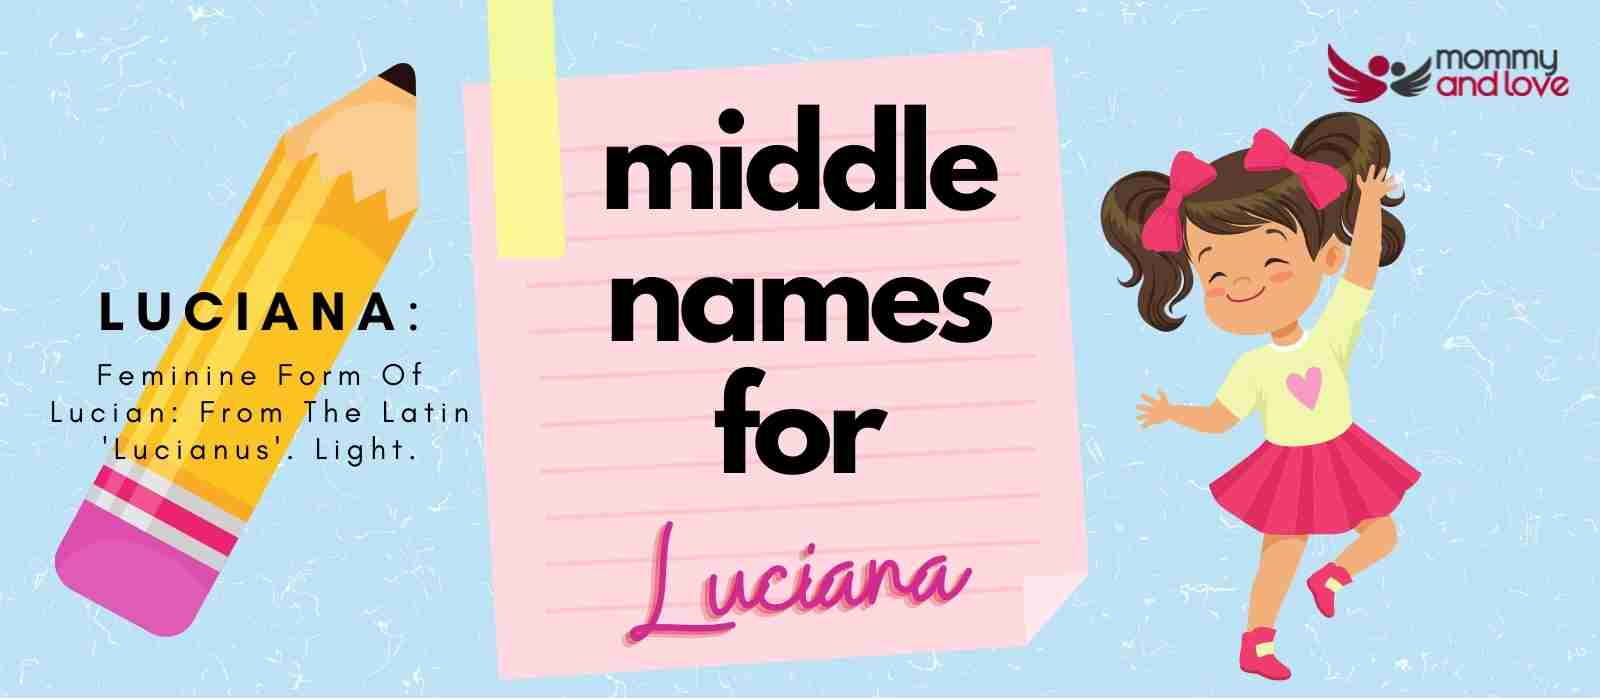 Middle Names for Luciana